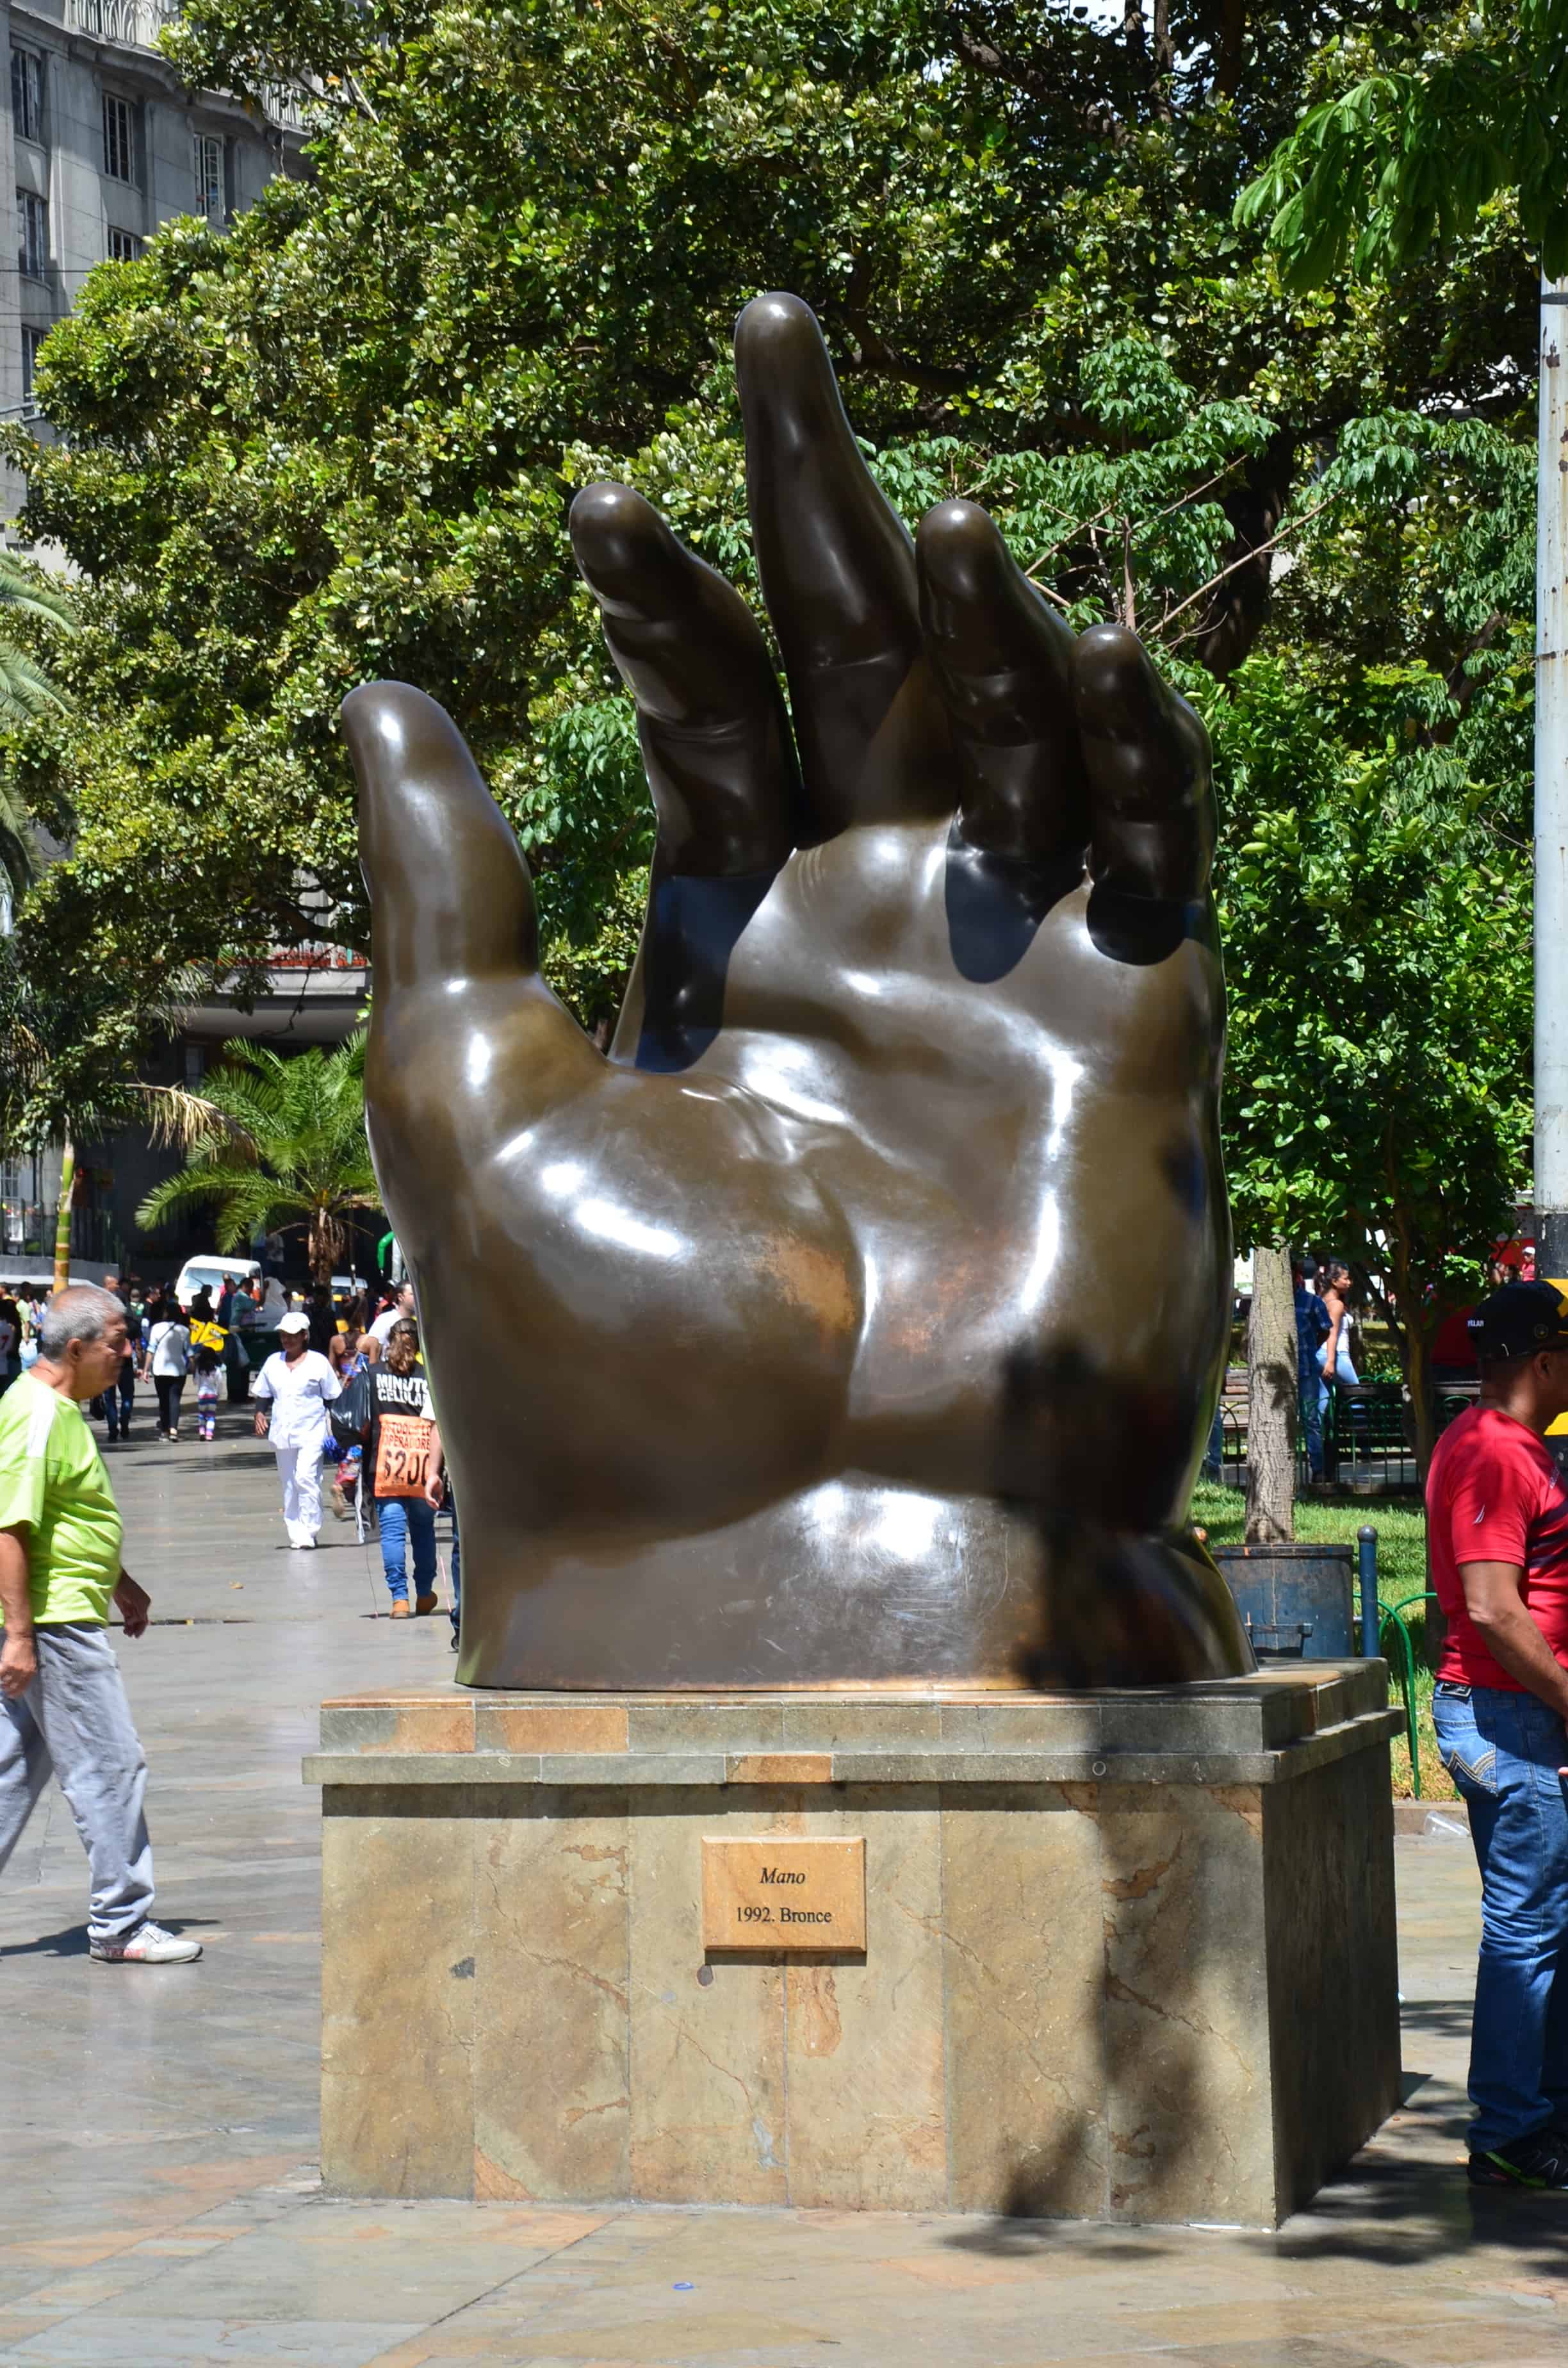 Mano (Hand) at Plaza Botero in Medellín, Antioquia, Colombia